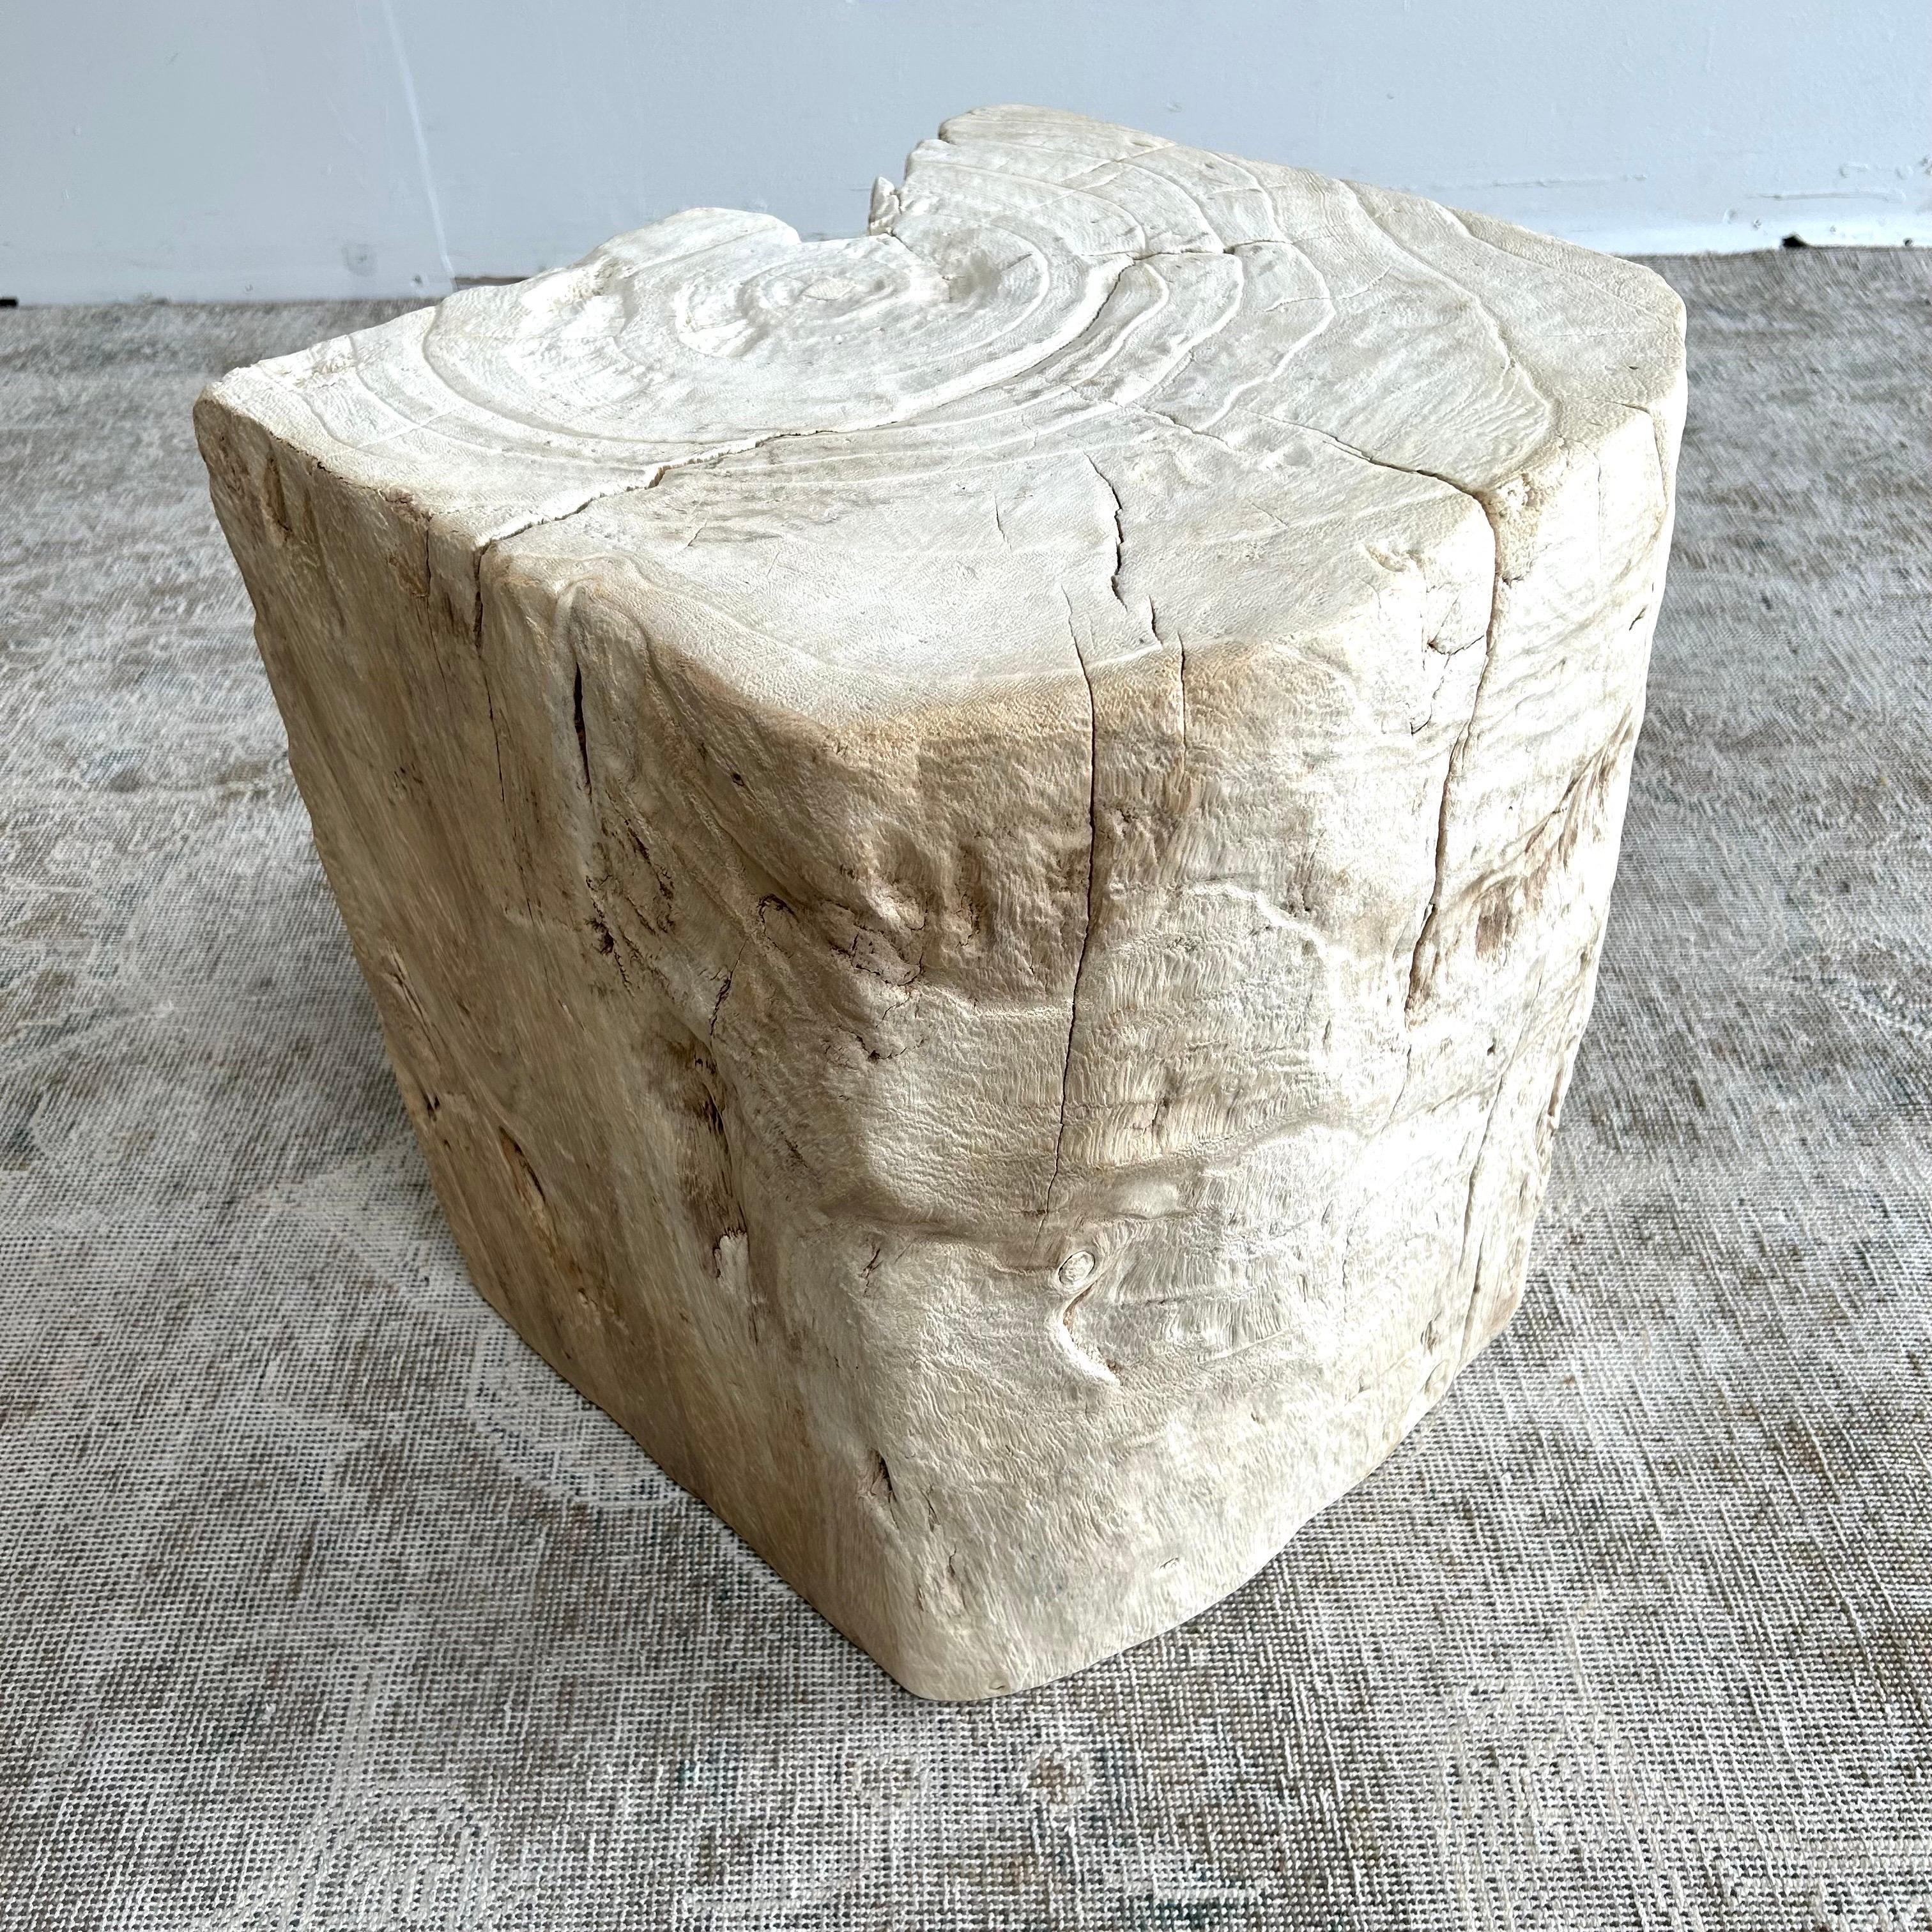 Natural Wood Stump Side Table or Stool 4